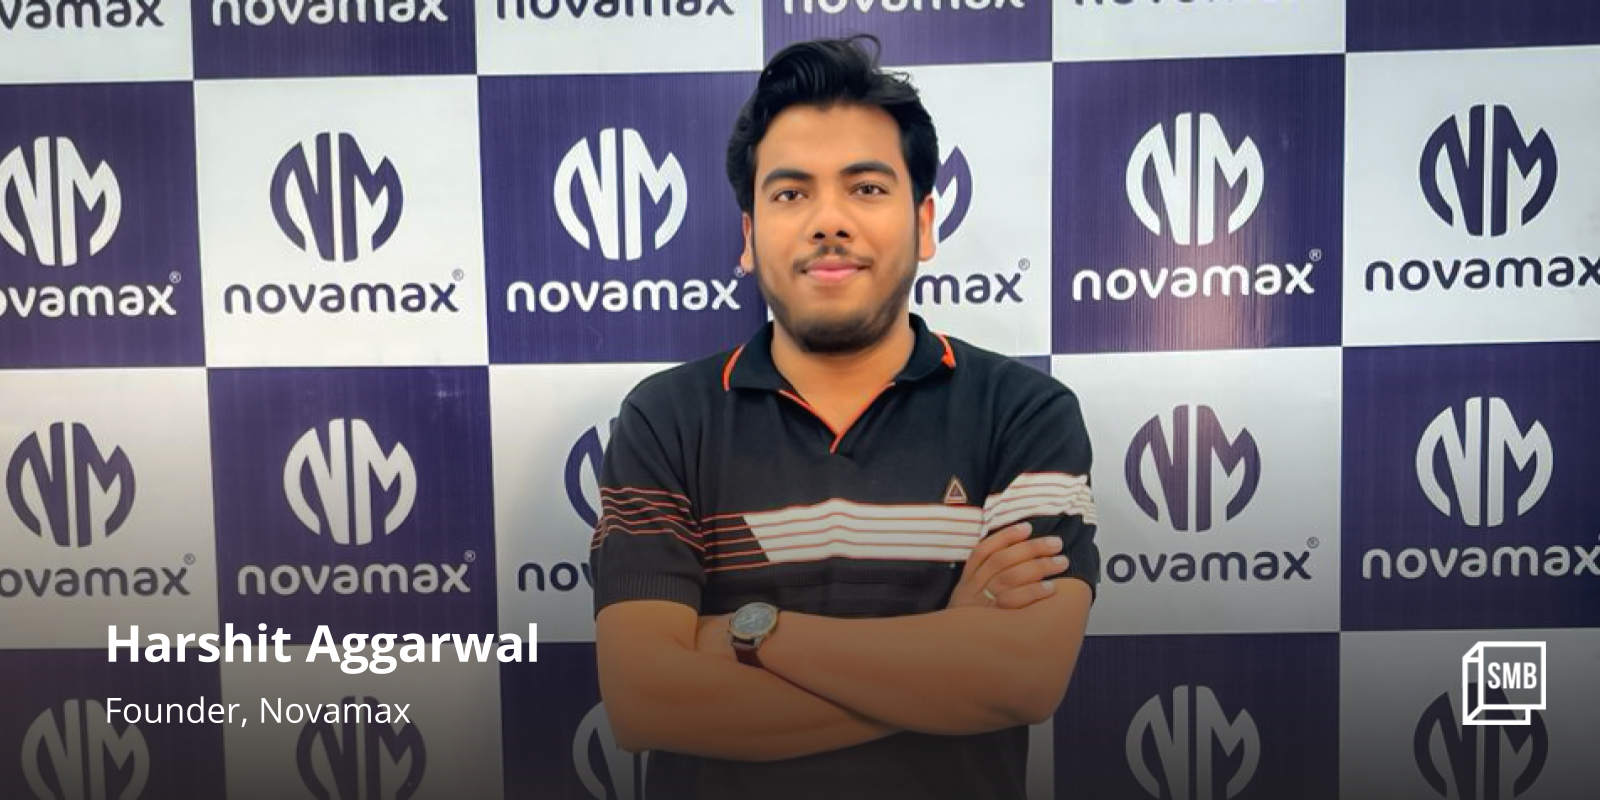 With Rs 160 Cr revenue in 5 years, air cooler maker Novamax is making hay while the sun shines 